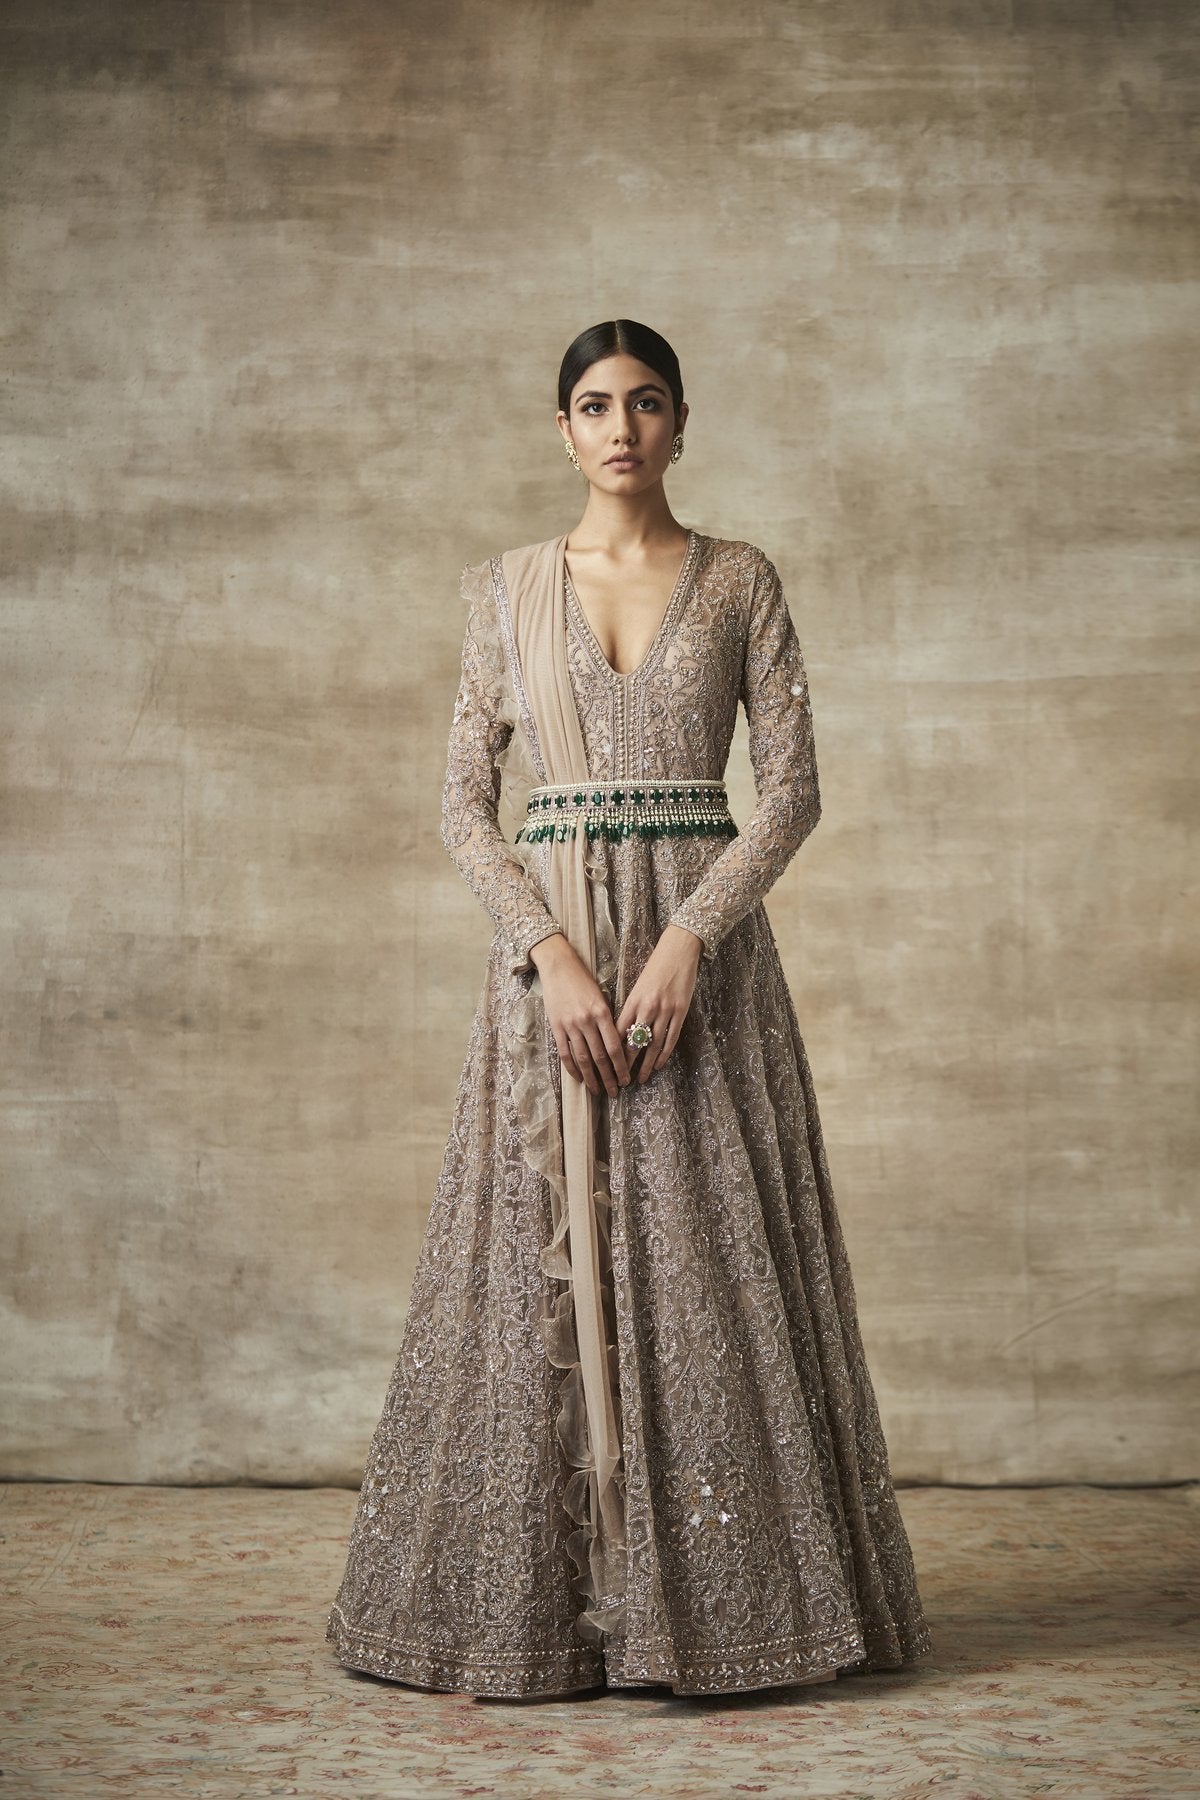 Offwhite color Indo western bridal gown | Indian wedding gowns, Bridal gowns,  Bridal ball gown